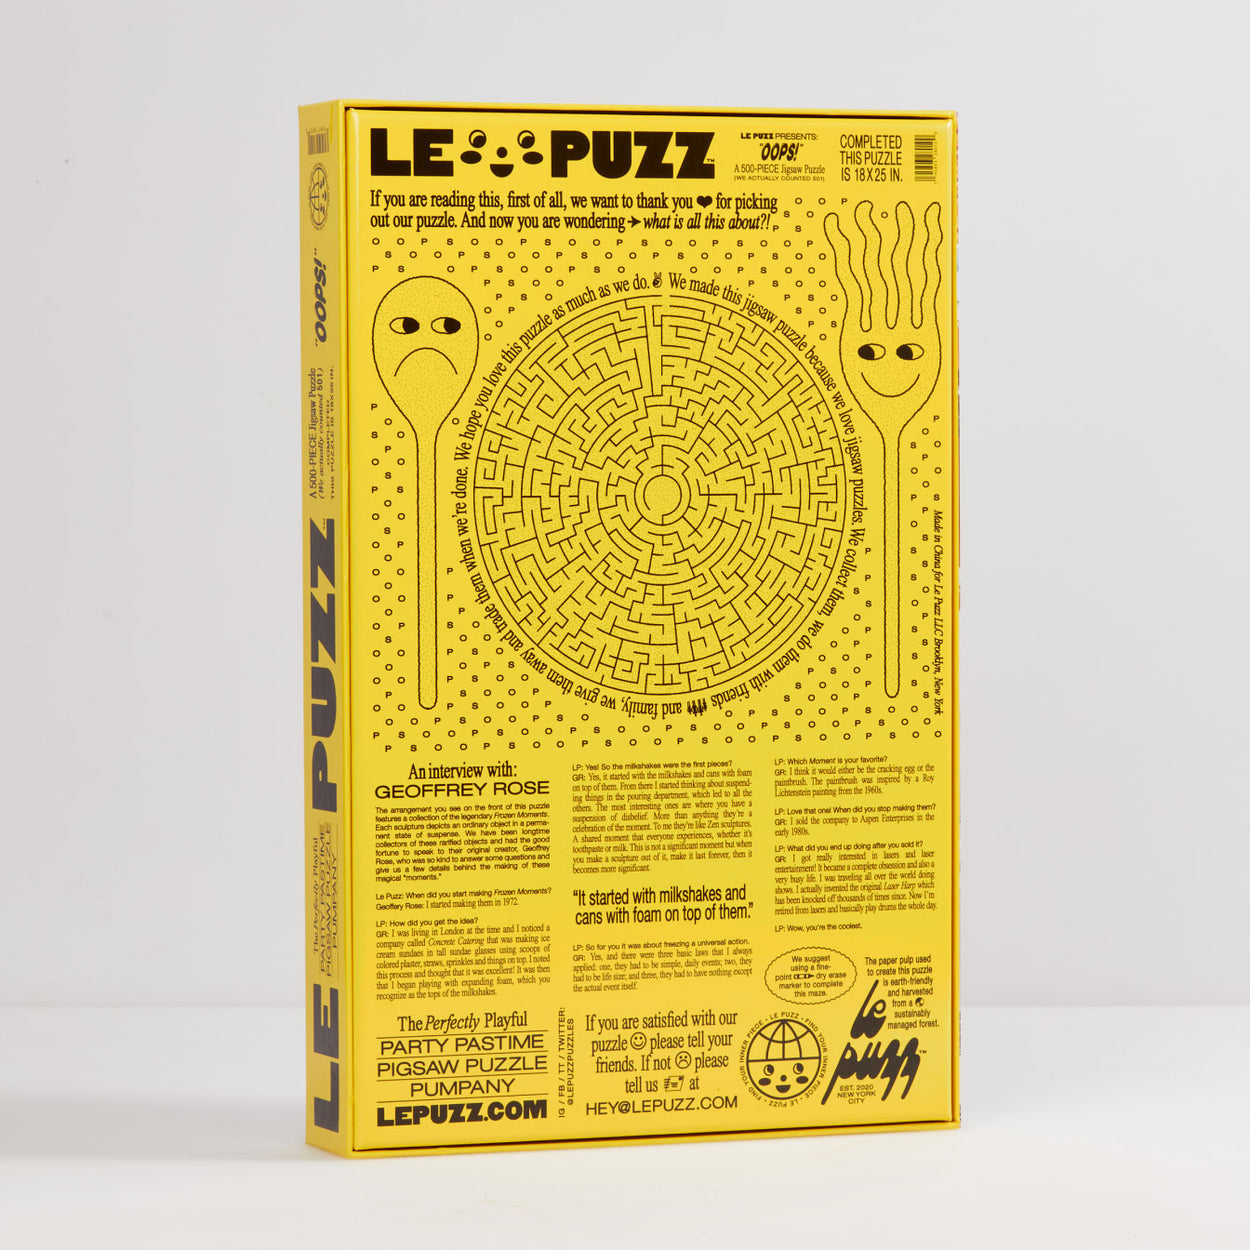 Oops Puzzle | Le Puzz | 500 Pieces: Oops is an homage to one of our favorite oddities — Frozen Moments! These wonderfully weird fake food objects are a moment frozen in time. We even tracked down their original creator Geoffrey Rose (see back of box for an exclusive interview).